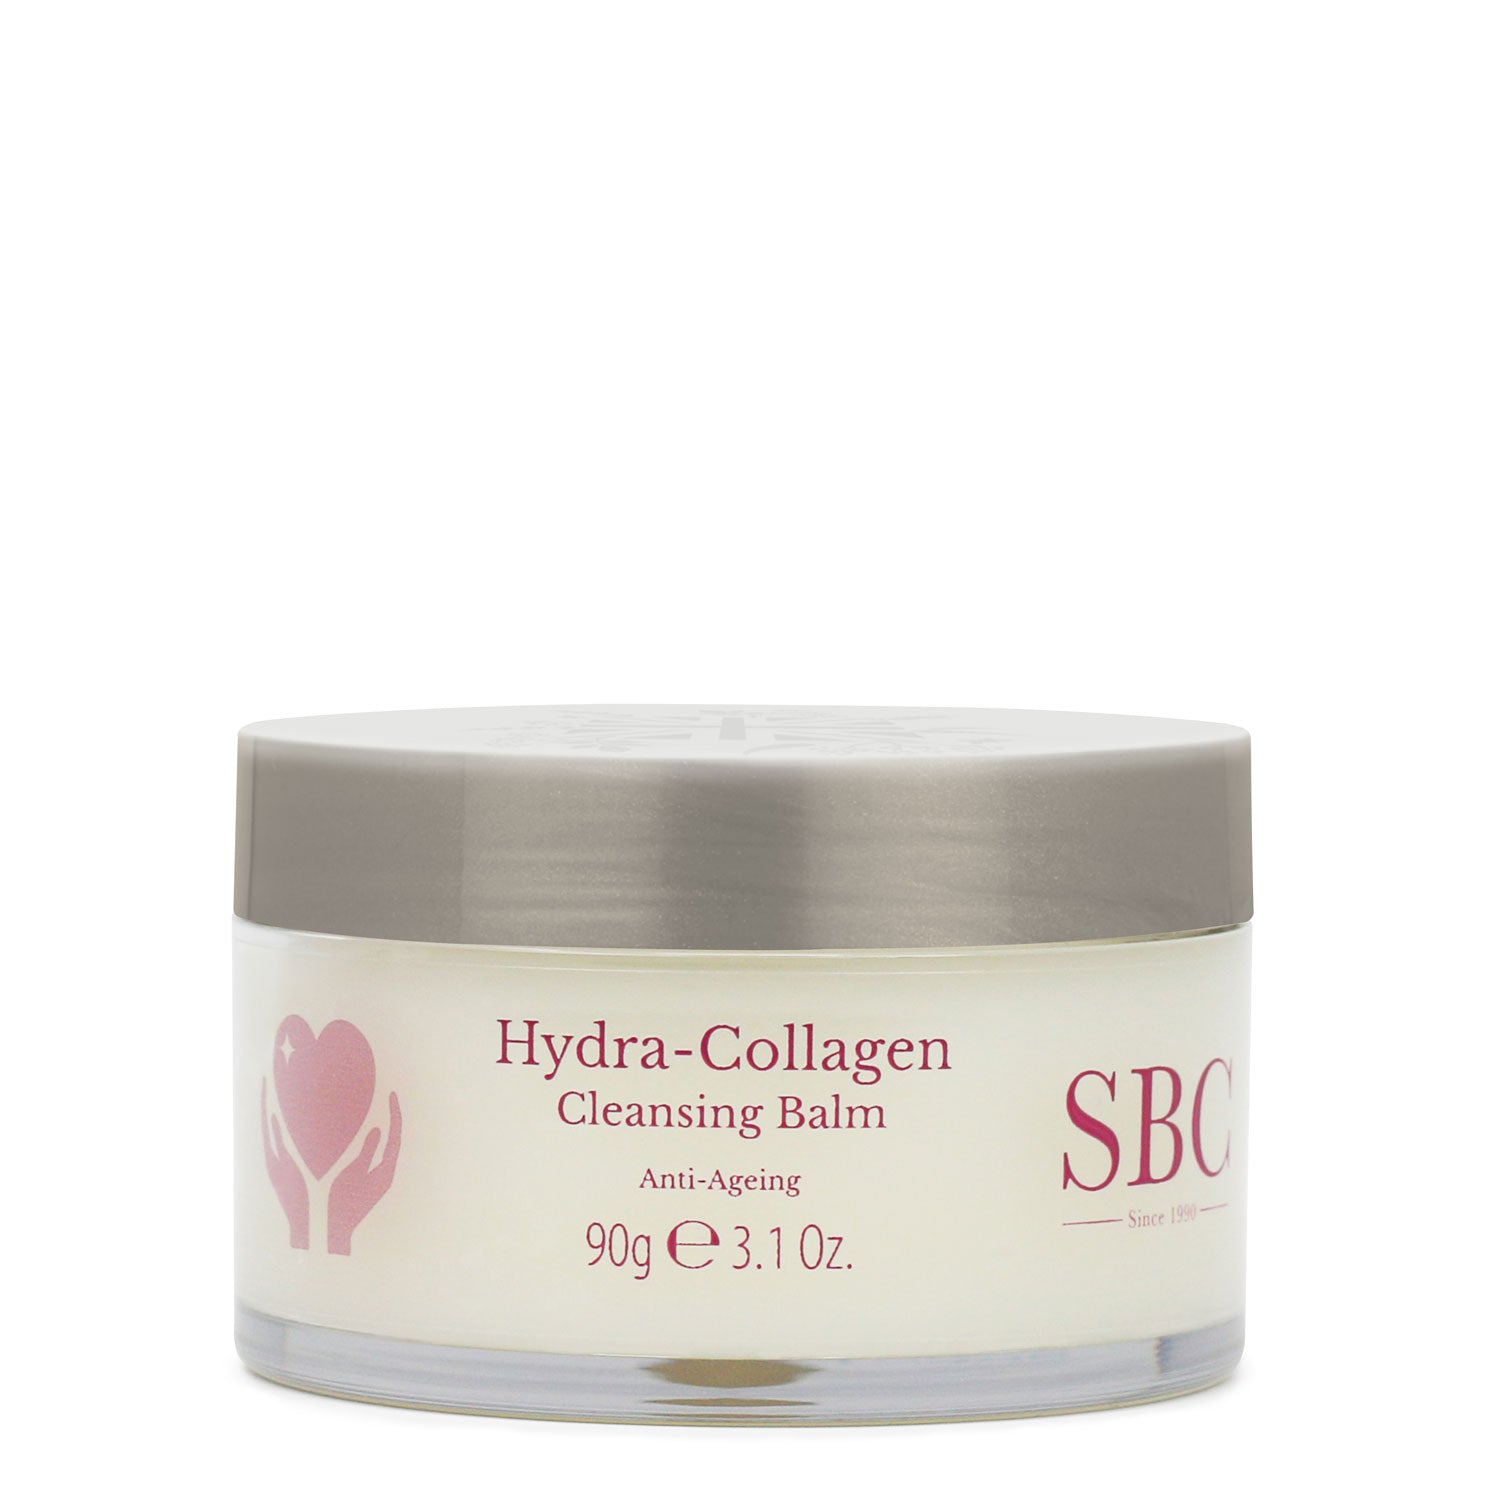 90g Hydra-Collagen Cleansing Balm on a white background 